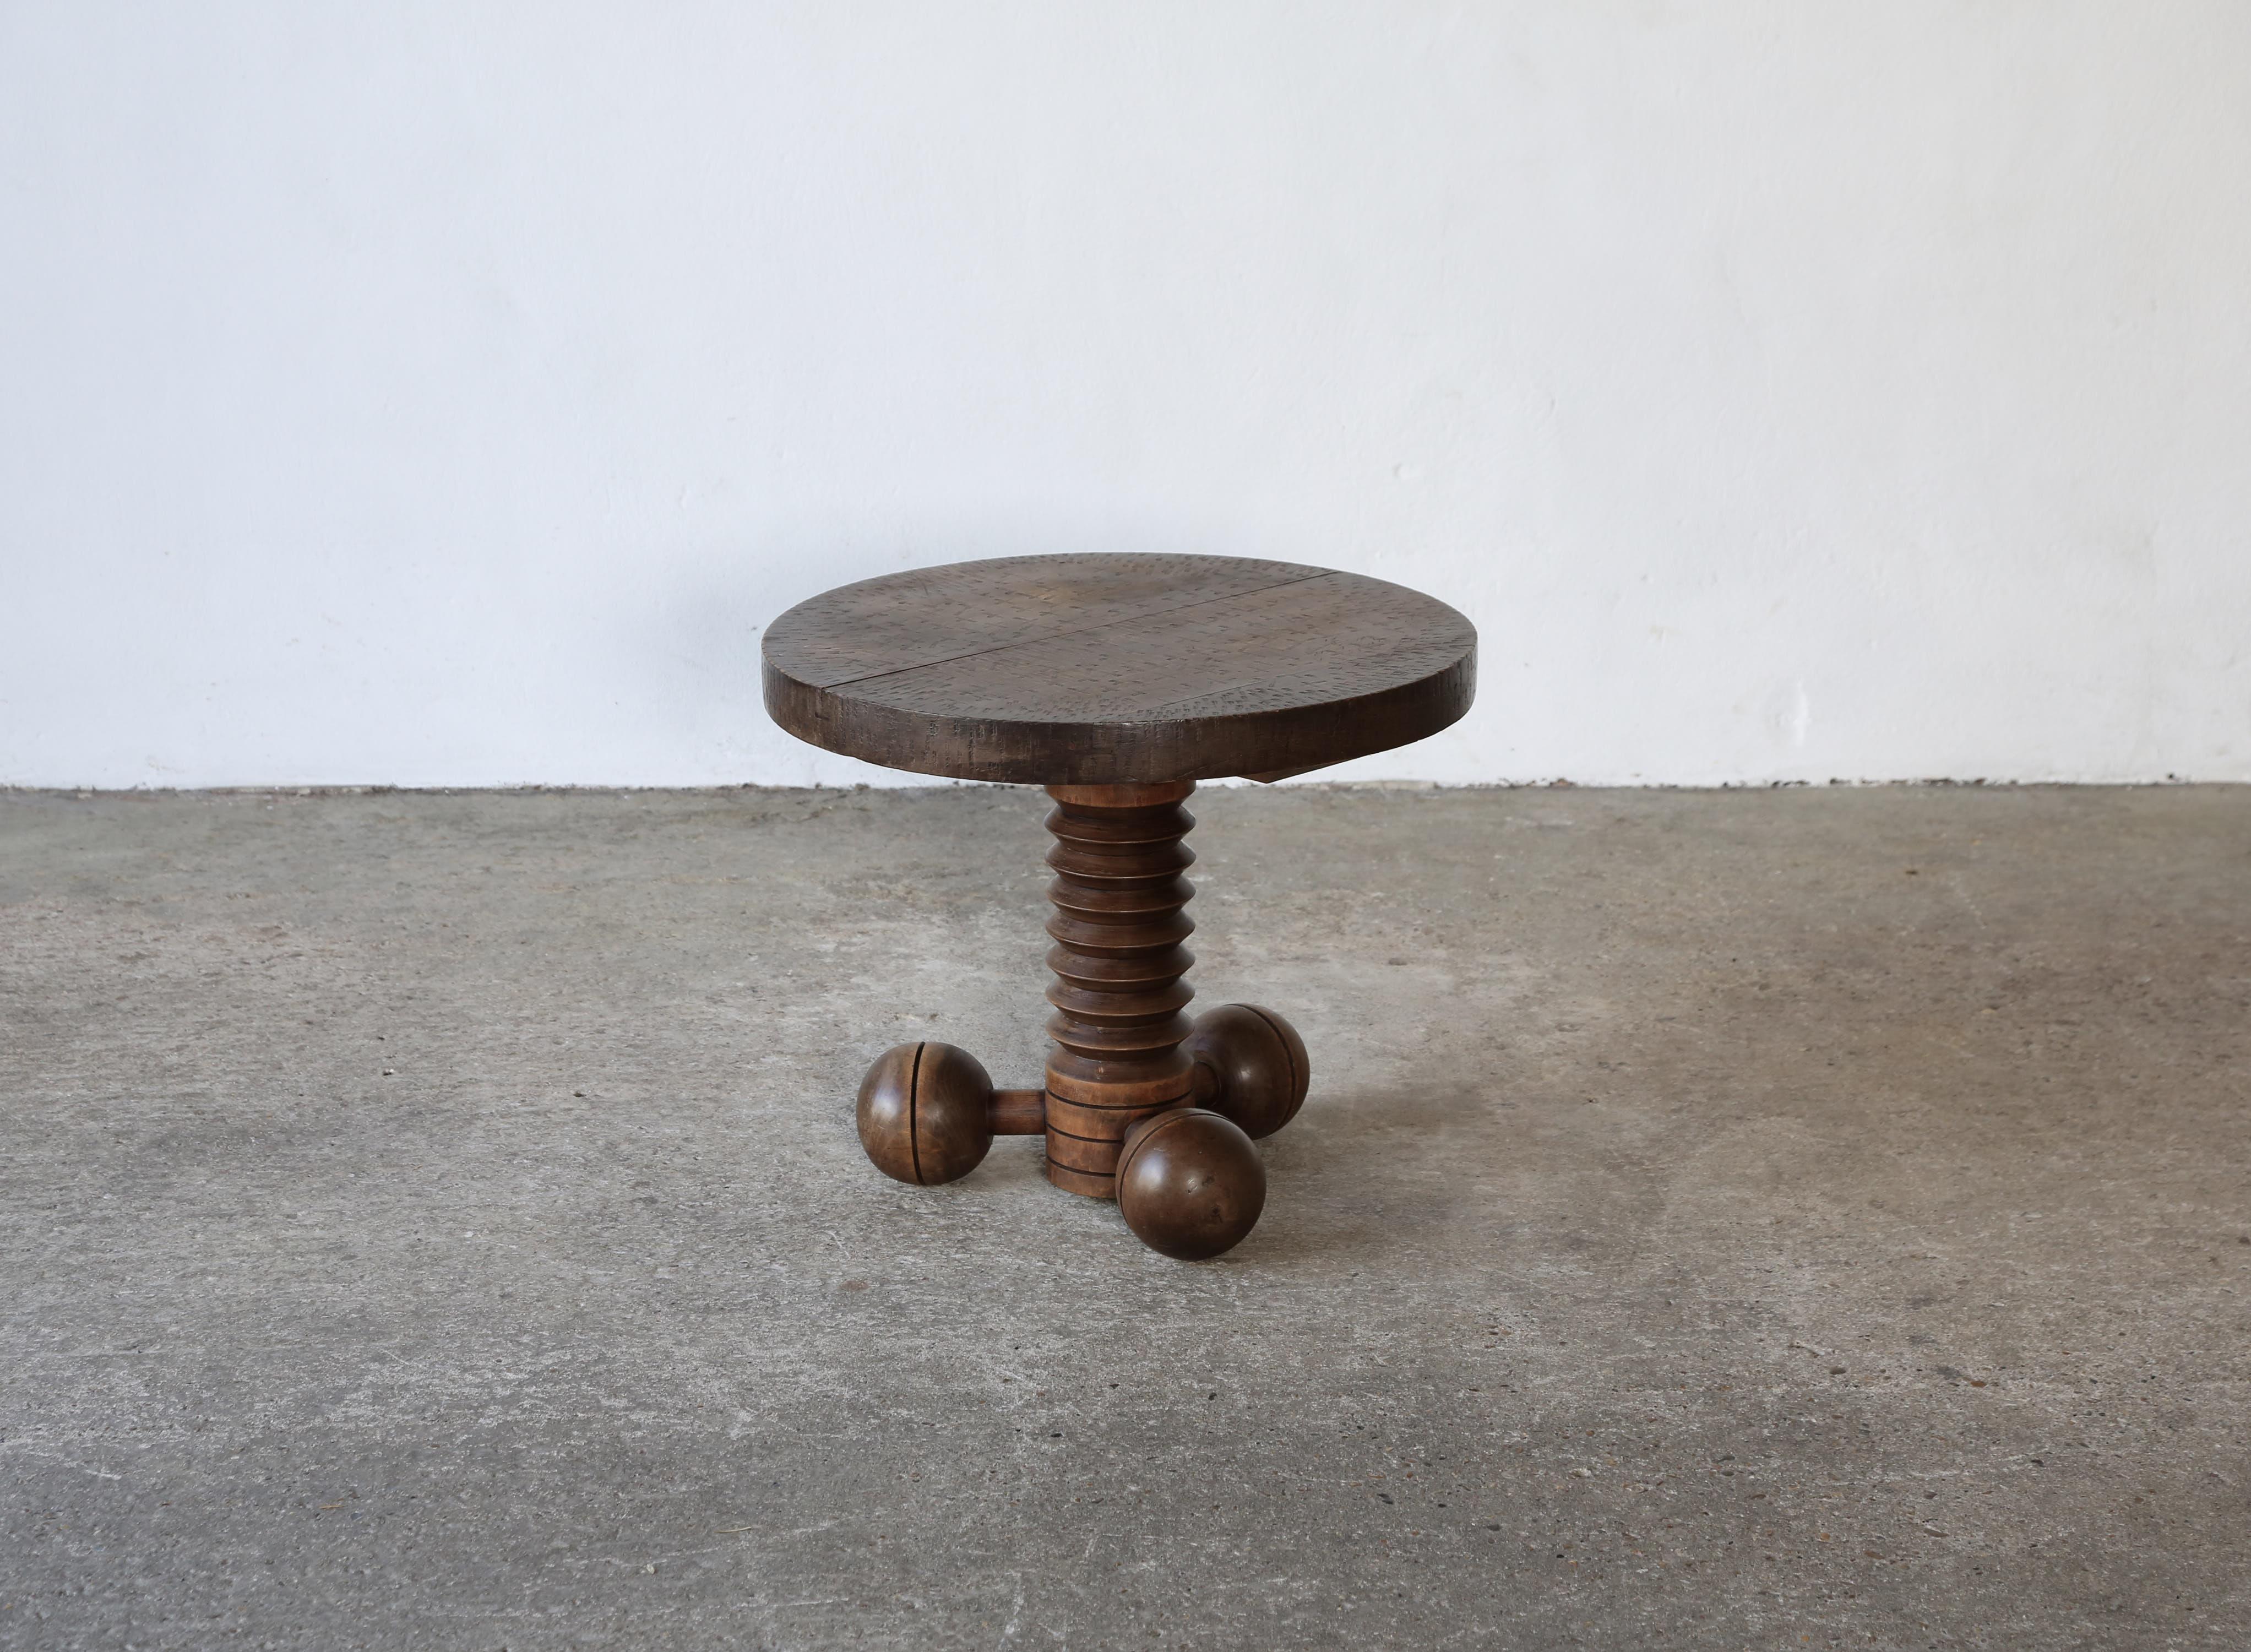 An original, early Charles Dudouyt ball / tripod table, France, 1940s.   Lovely tone and patina.  A rare, hard to find and very collectable piece.   Fast shipping worldwide.

We have a second table available - please see final images and our other